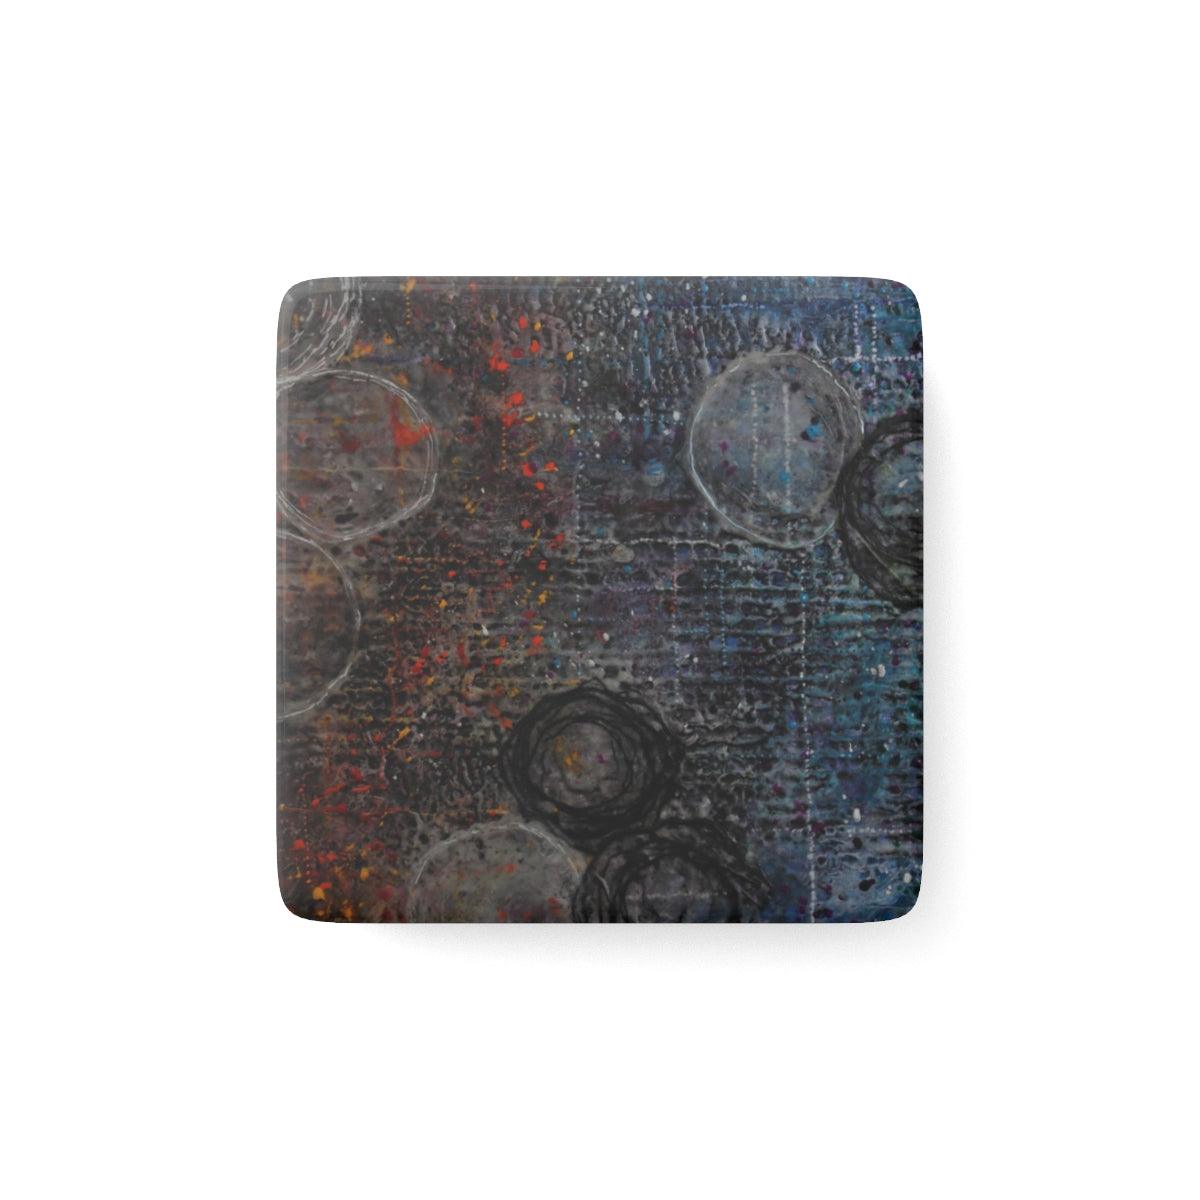 "Chaotic Timing" Porcelain Magnet, Square-Magnet - Mike Giannella - Encaustic Painting - Mixed Media Artist - Art Prints